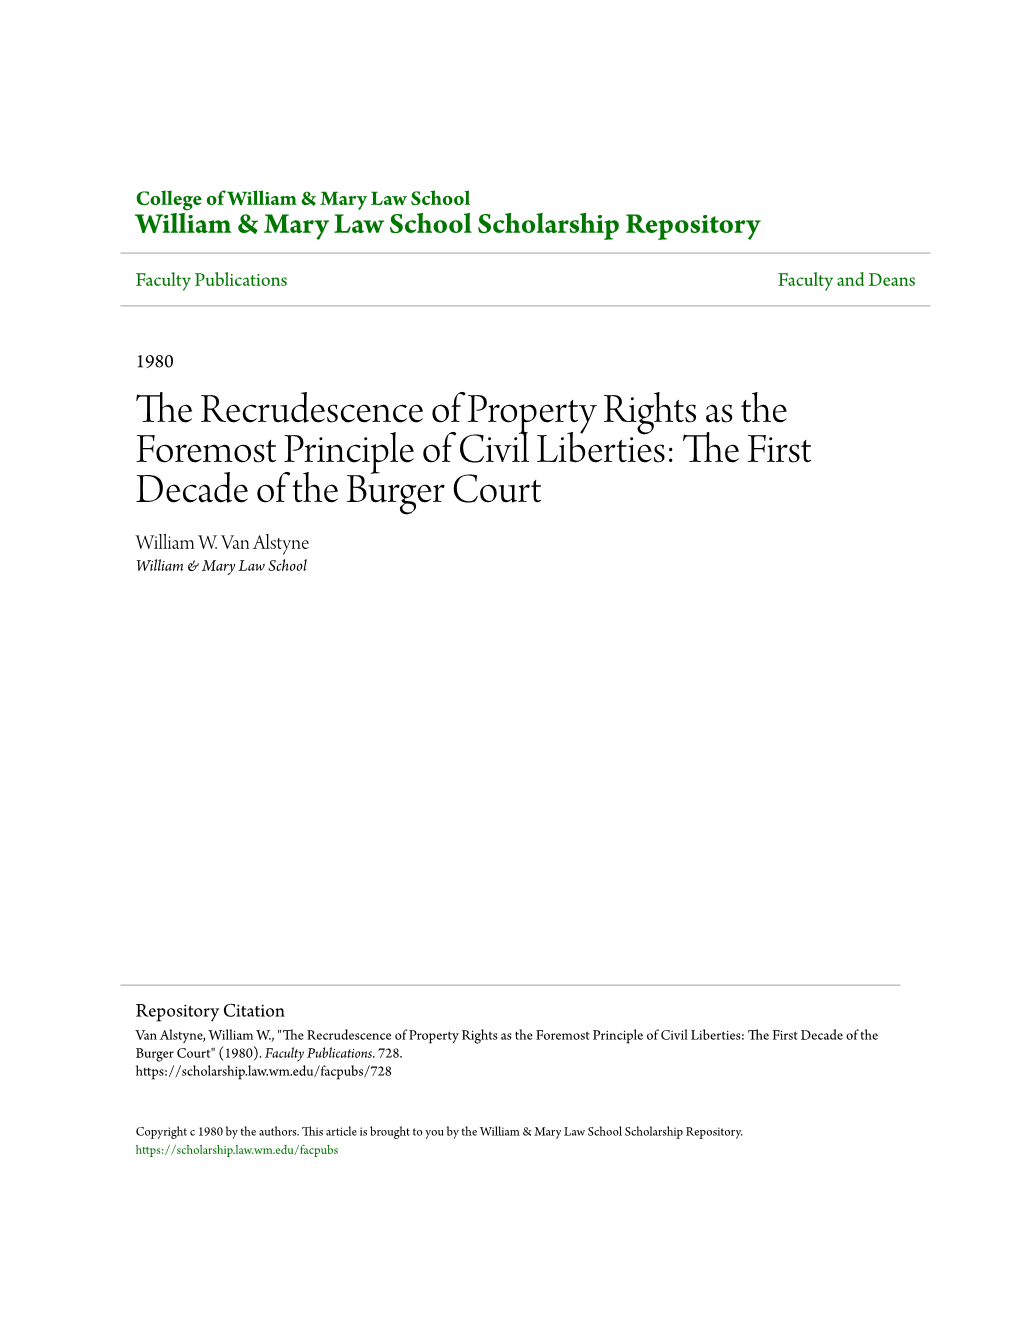 The Recrudescence of Property Rights As the Foremost Principle of Civil Liberties: the Irsf T Decade of the Burger Court William W